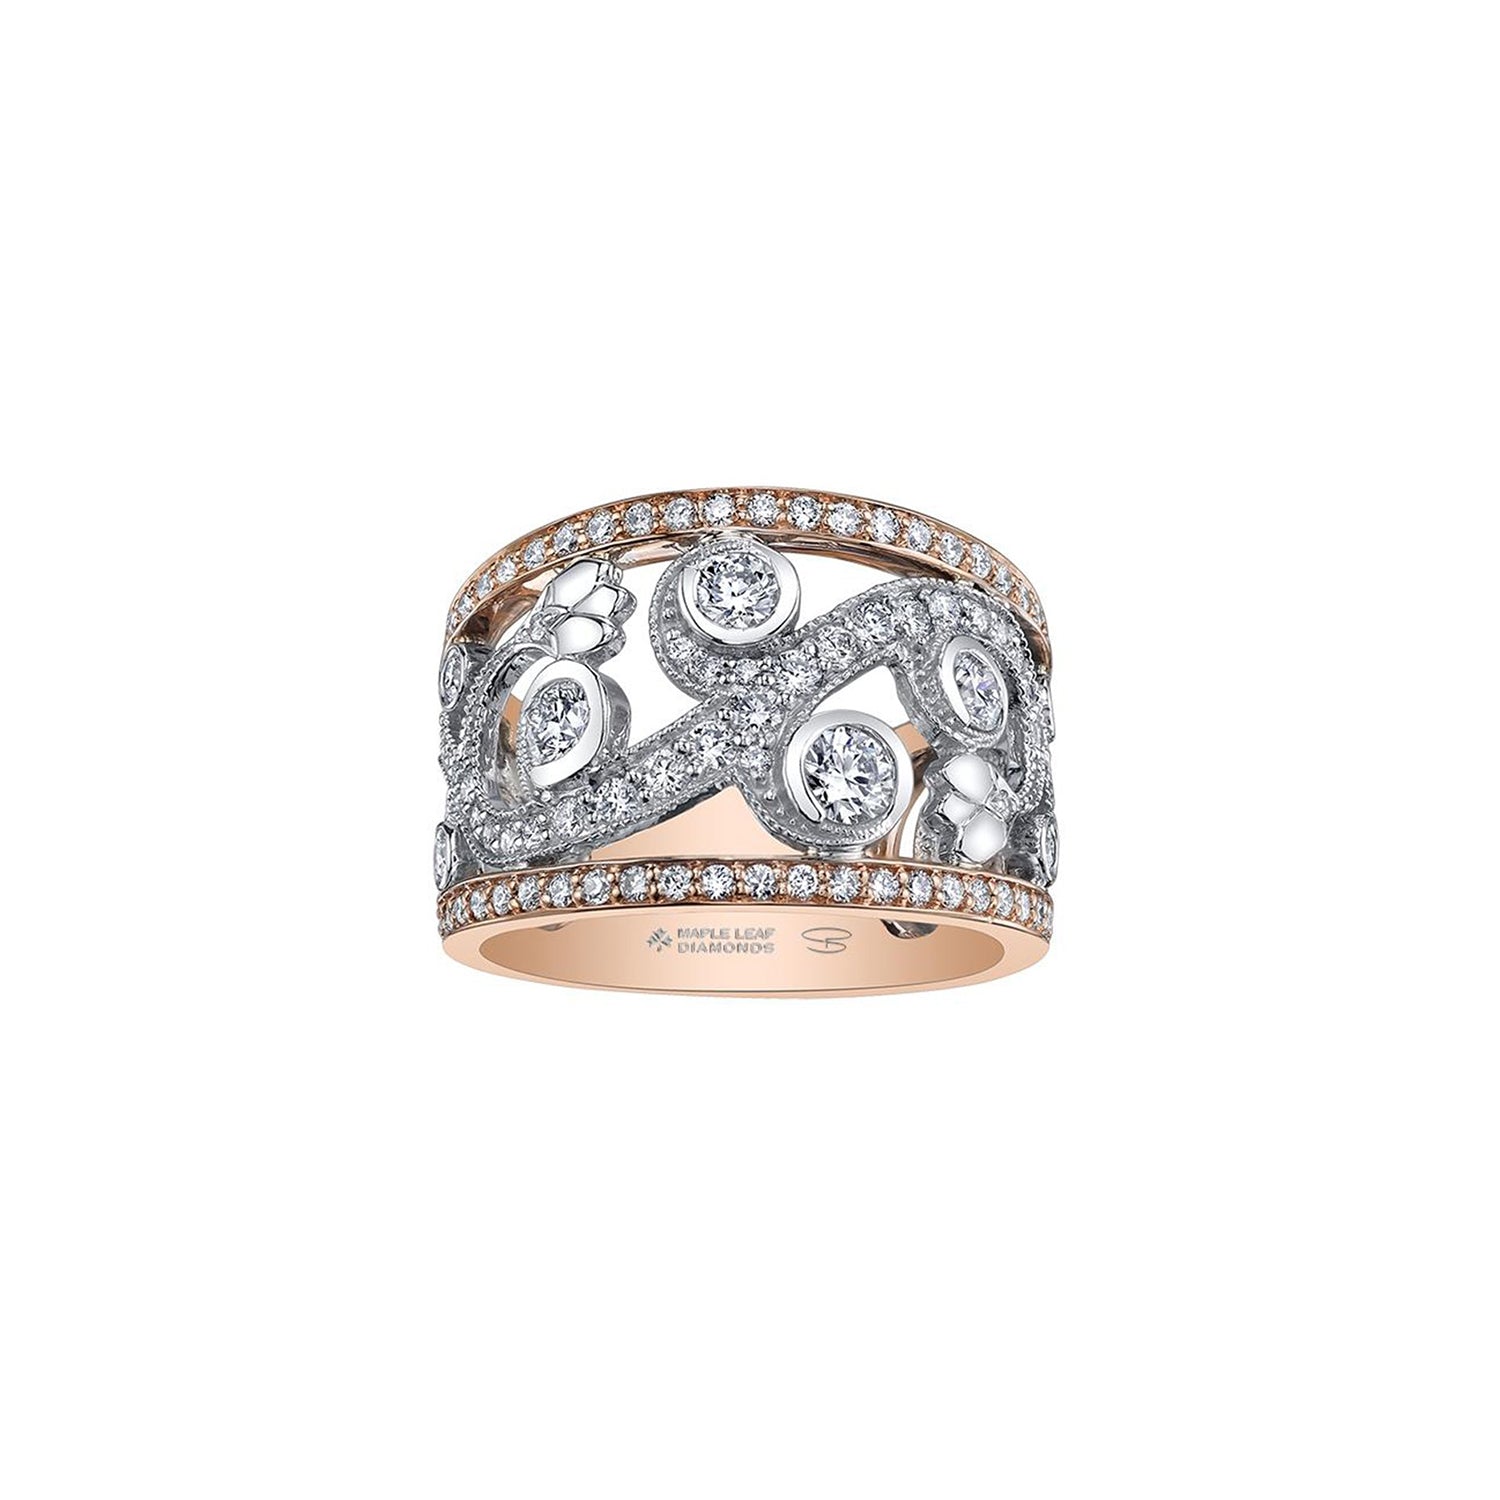 Crafted in rose and white 14KT Candian Certified Gold, this ring features a rose vine design set with round brilliant-cut Canadian diamonds and diamond set rims.